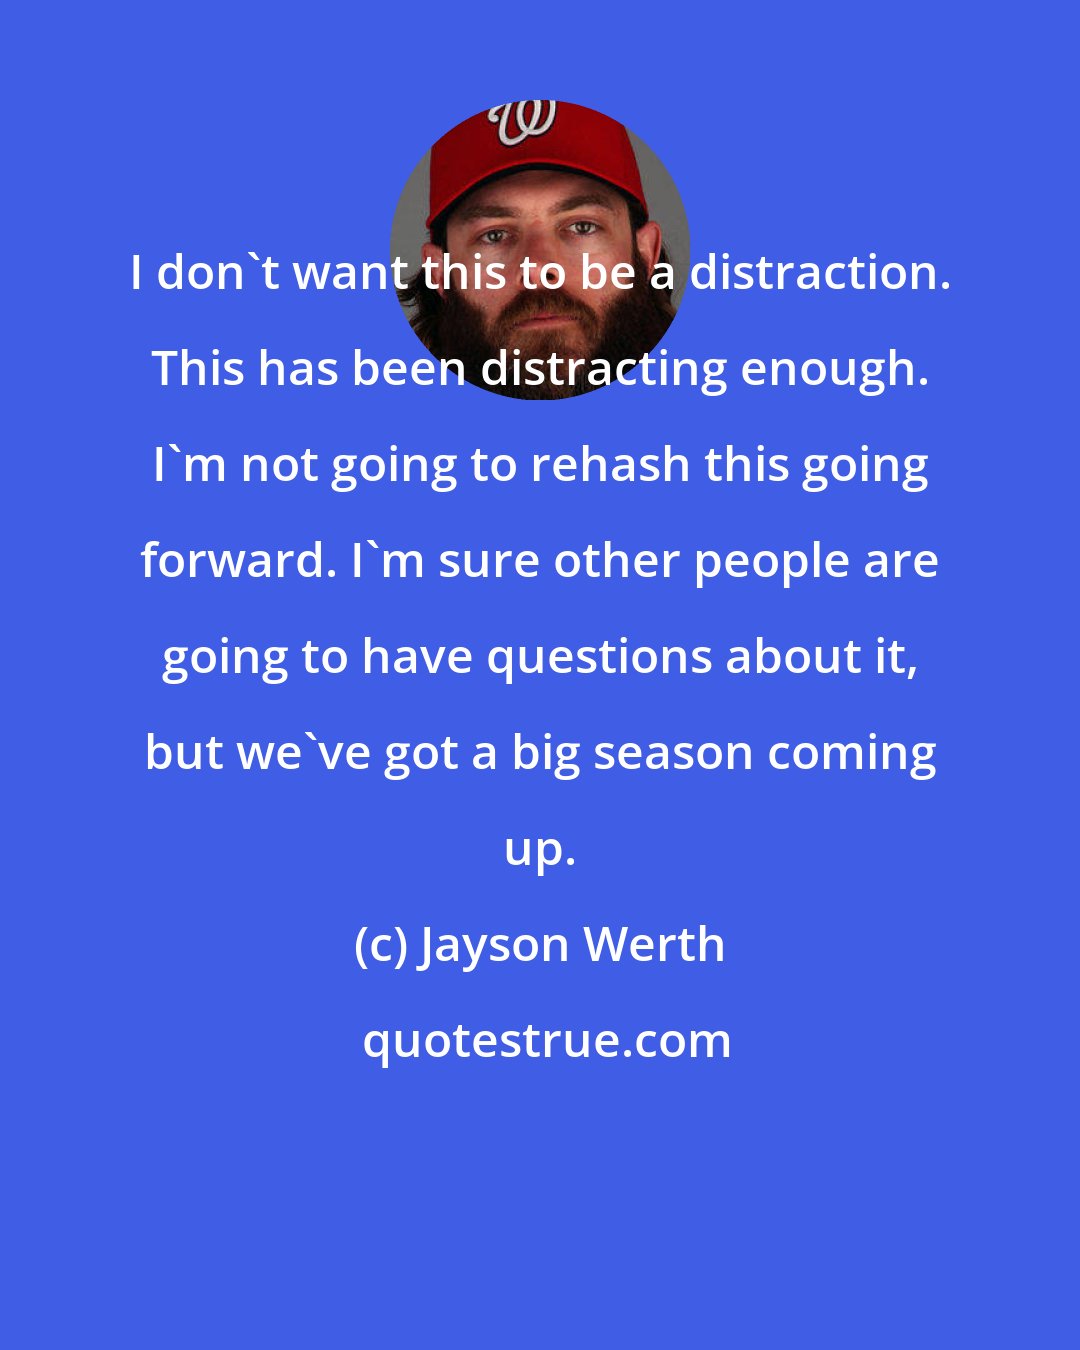 Jayson Werth: I don't want this to be a distraction. This has been distracting enough. I'm not going to rehash this going forward. I'm sure other people are going to have questions about it, but we've got a big season coming up.